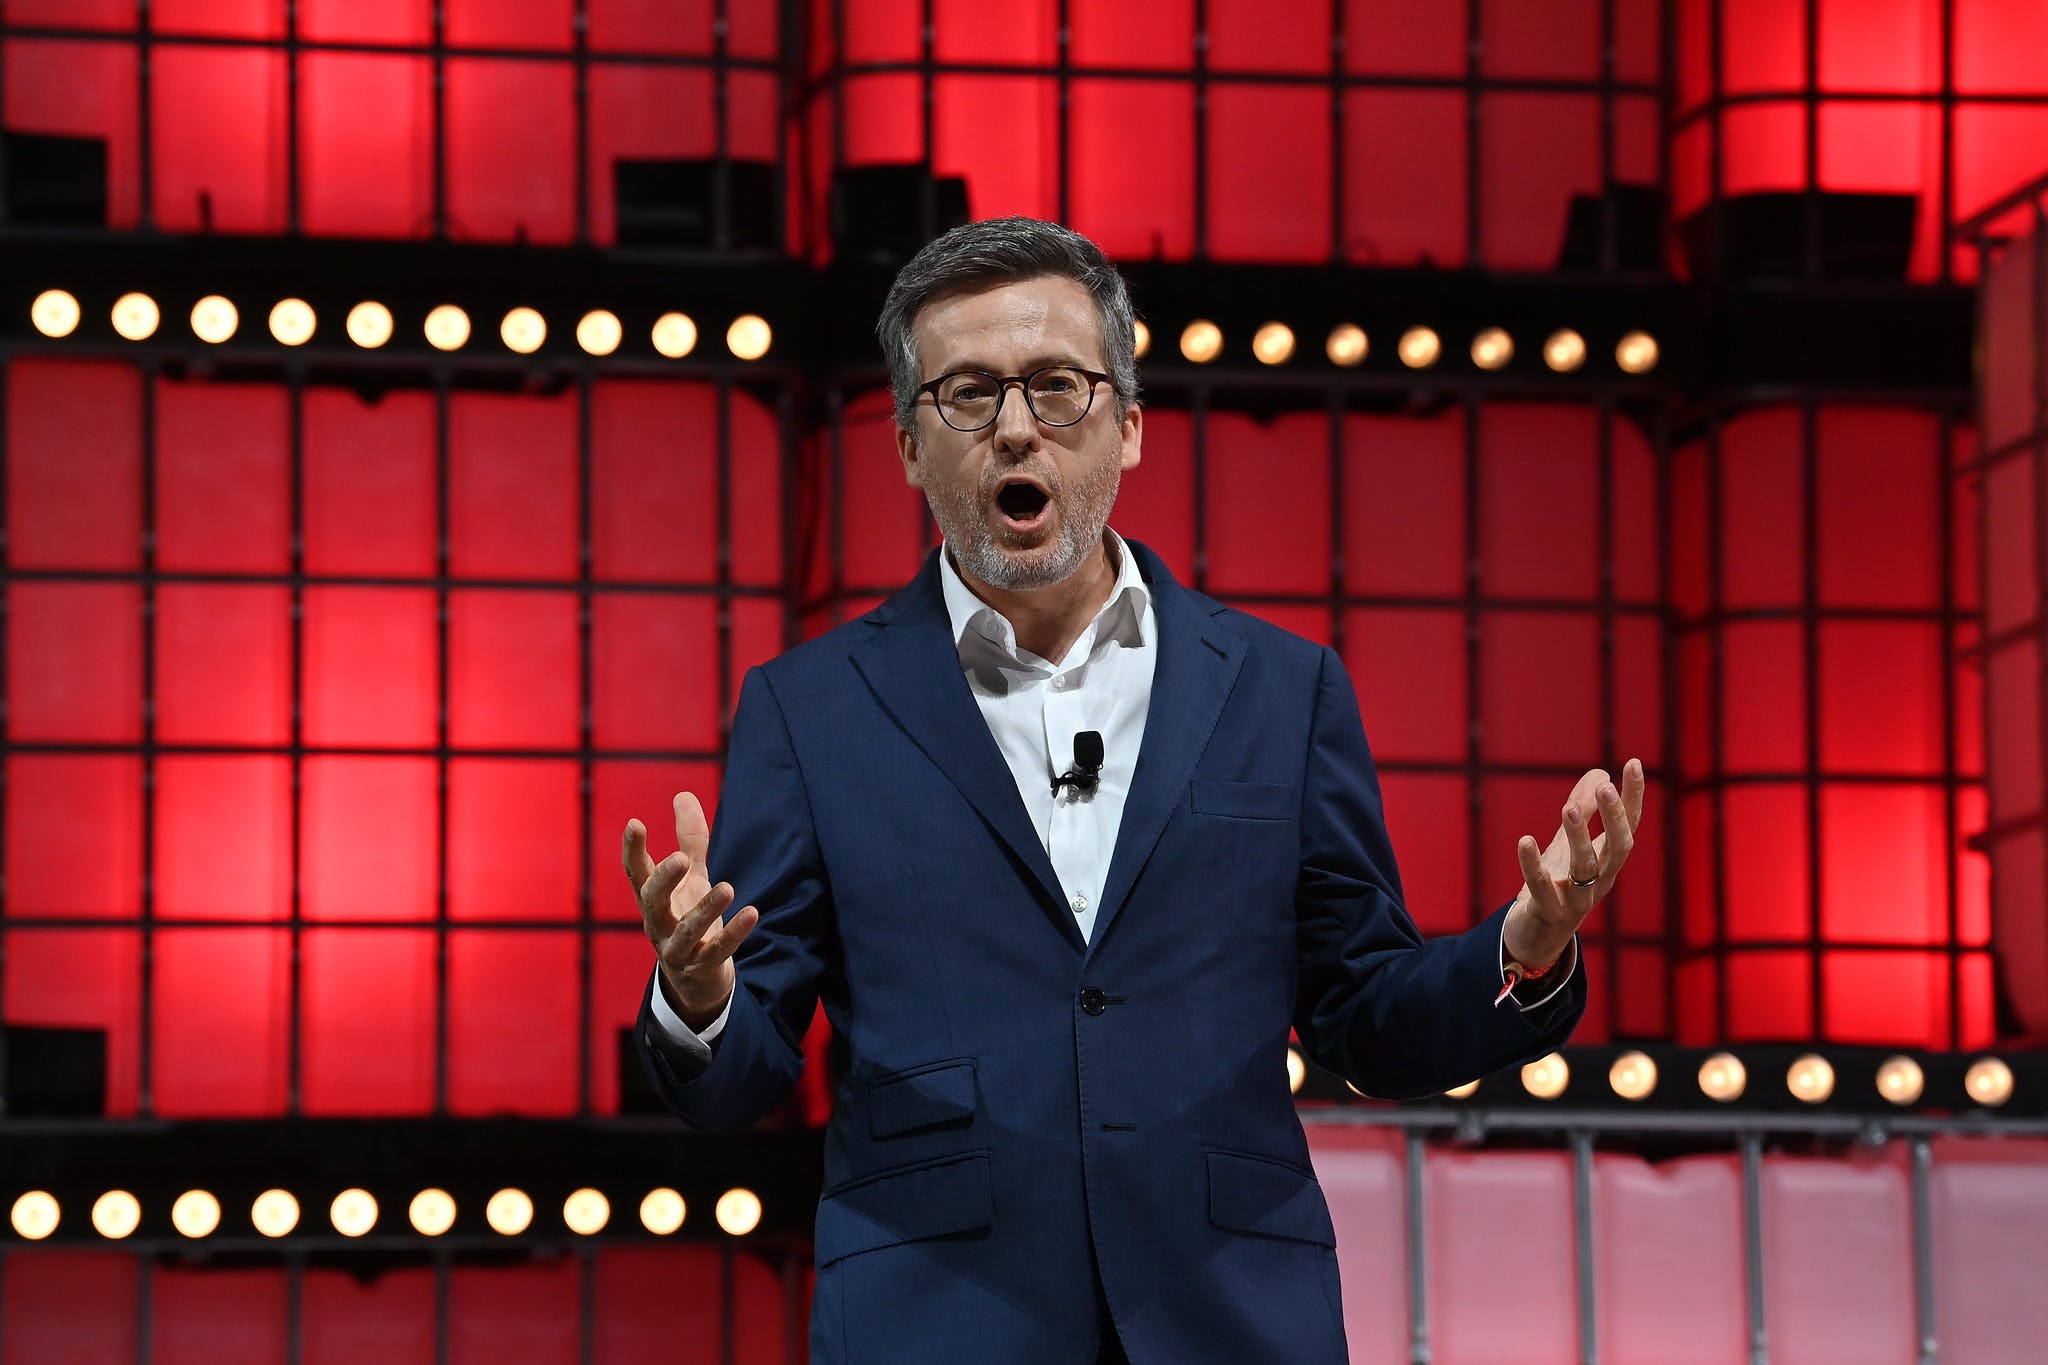 An image of Carlos Moedas, mayor of Lisbon. Carlos is looking directly at the camera and gesturing emphatically with both hands. Carlos is wearing what appears to be a small microphone attached to a shirt. Carlos appears to be speaking.